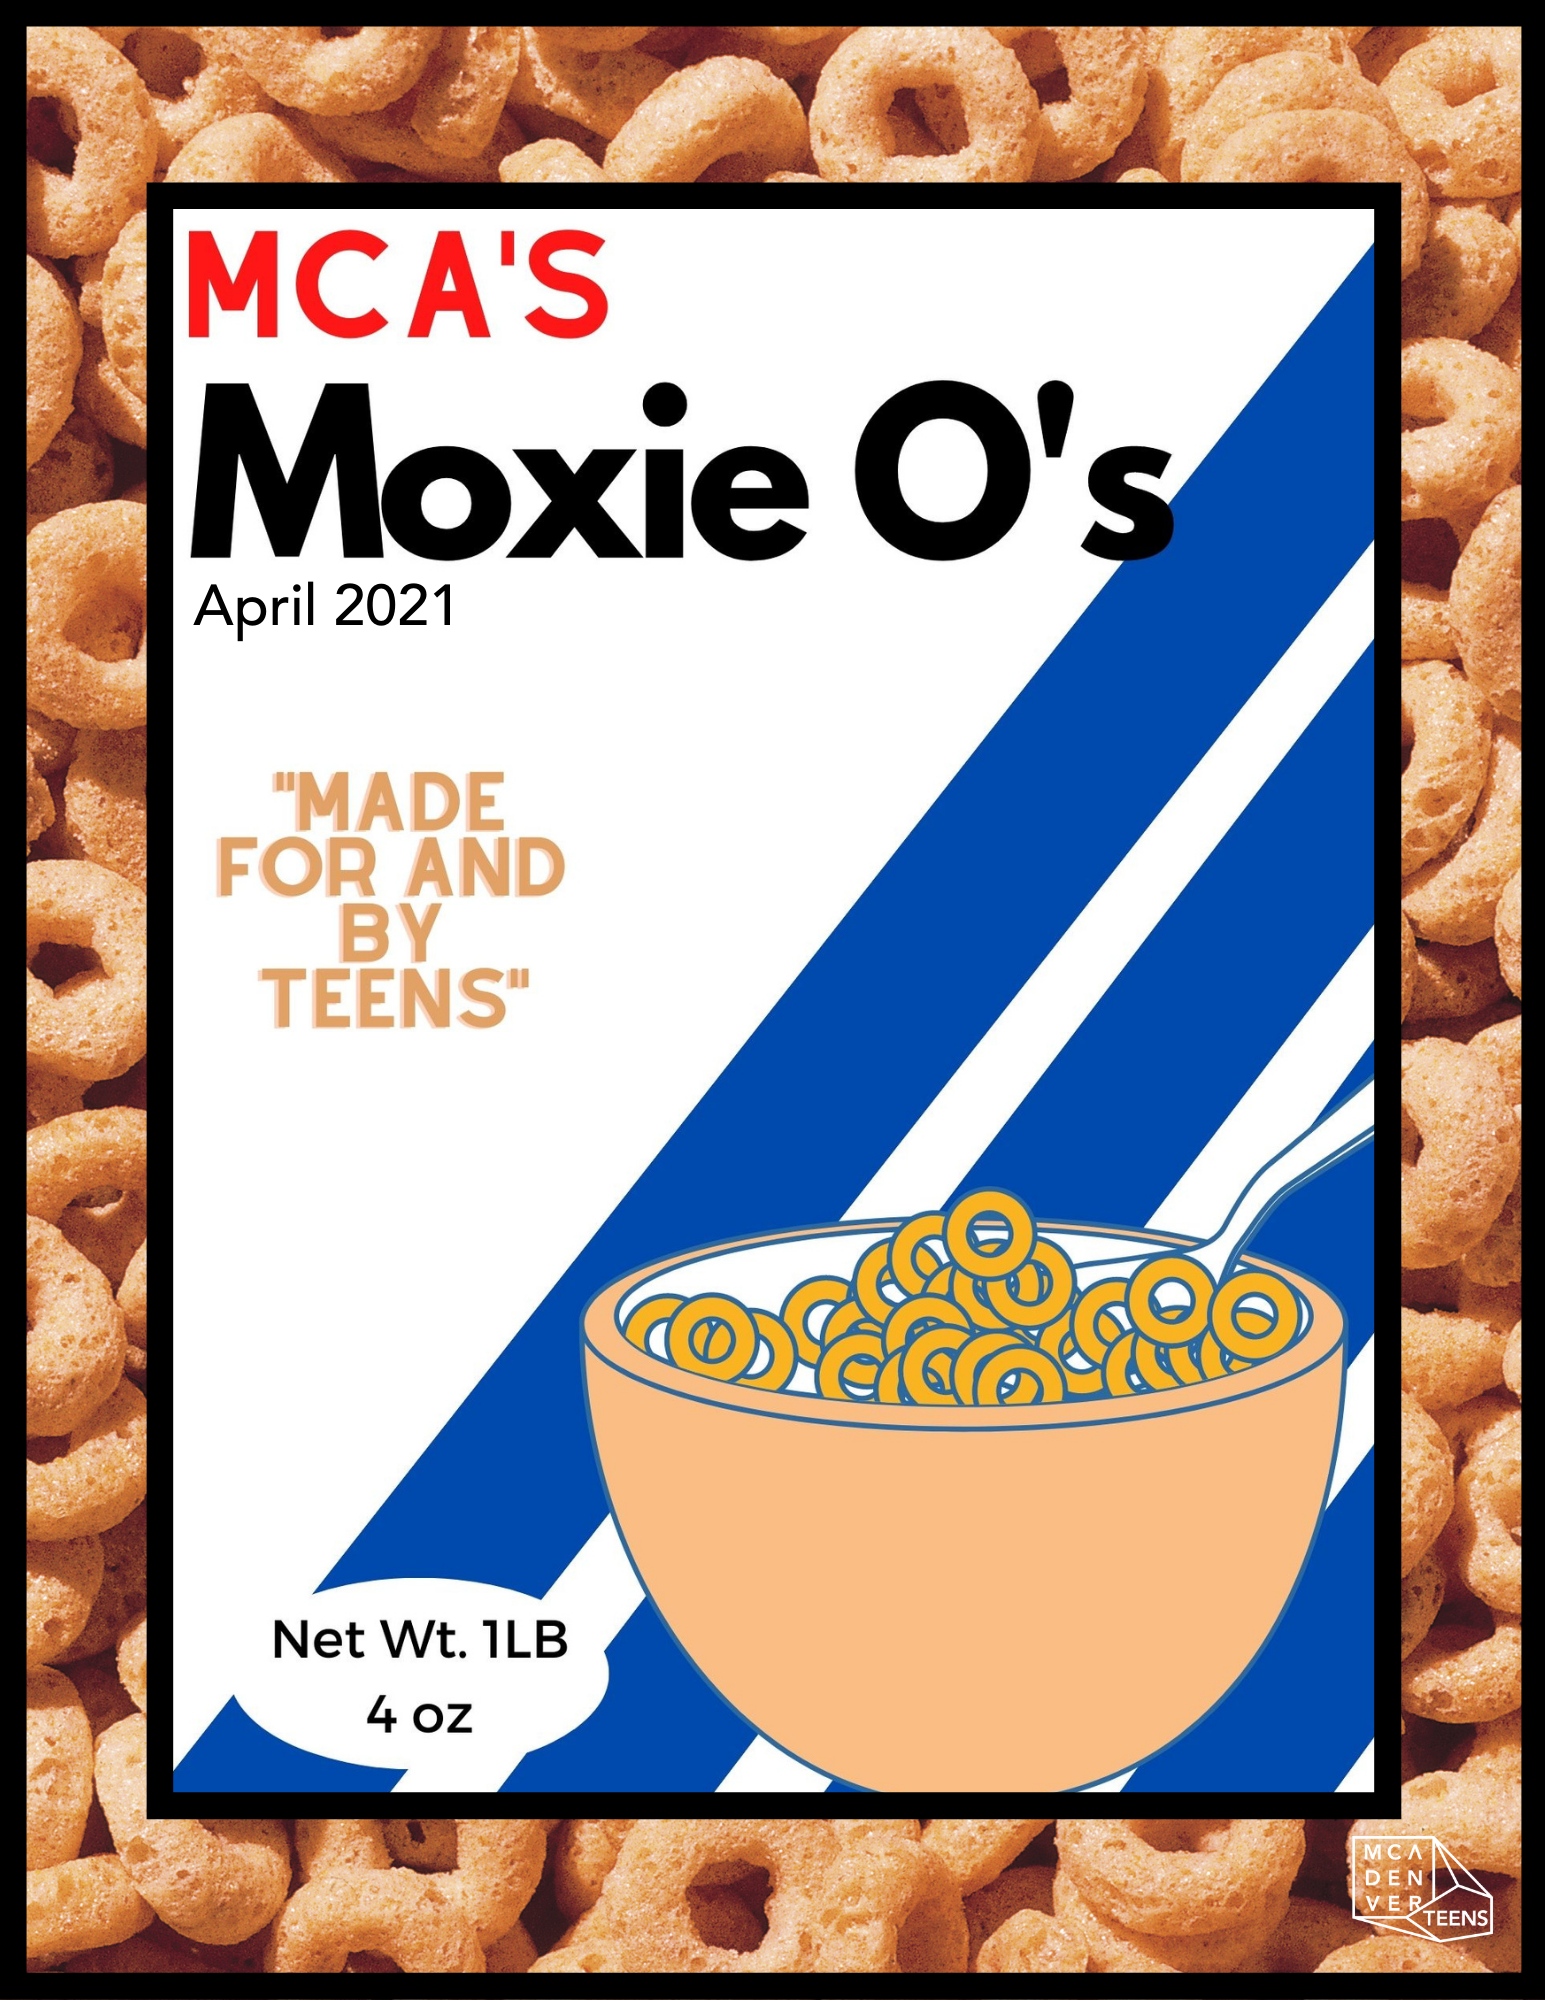 Cover of April 2021 MoxieMag. The background is a close up image of cheerios, and overlaid on that image is a white box with a black outline, with text inside the box that reads, “MCA’s Moxie O’s, April 2021, ‘Made for and by teens’” in all capital letters. Within the box is a small graphic of cheerios in a bowl, placed on top of four thick cobalt blue slanted lines.